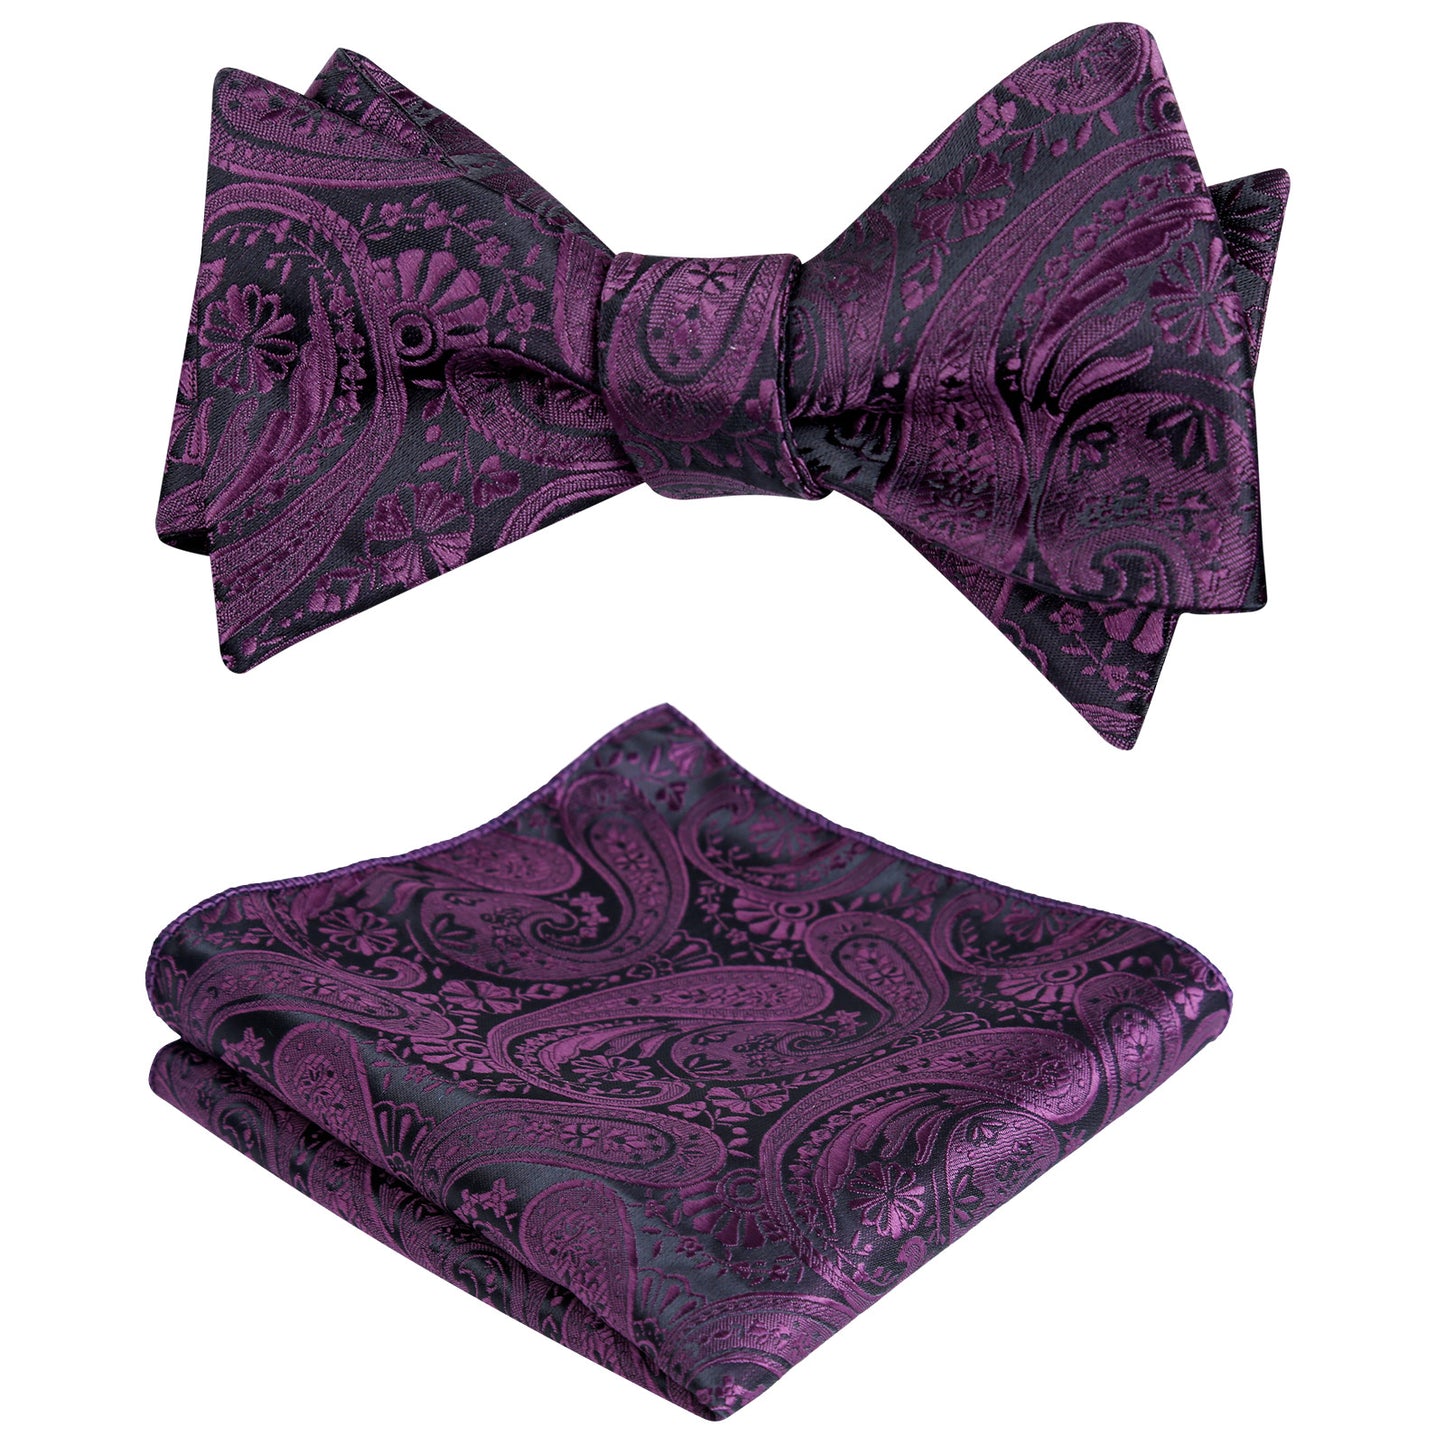 Men's Self-tied Paisley Bow Tie and Pocket Square Set, 167